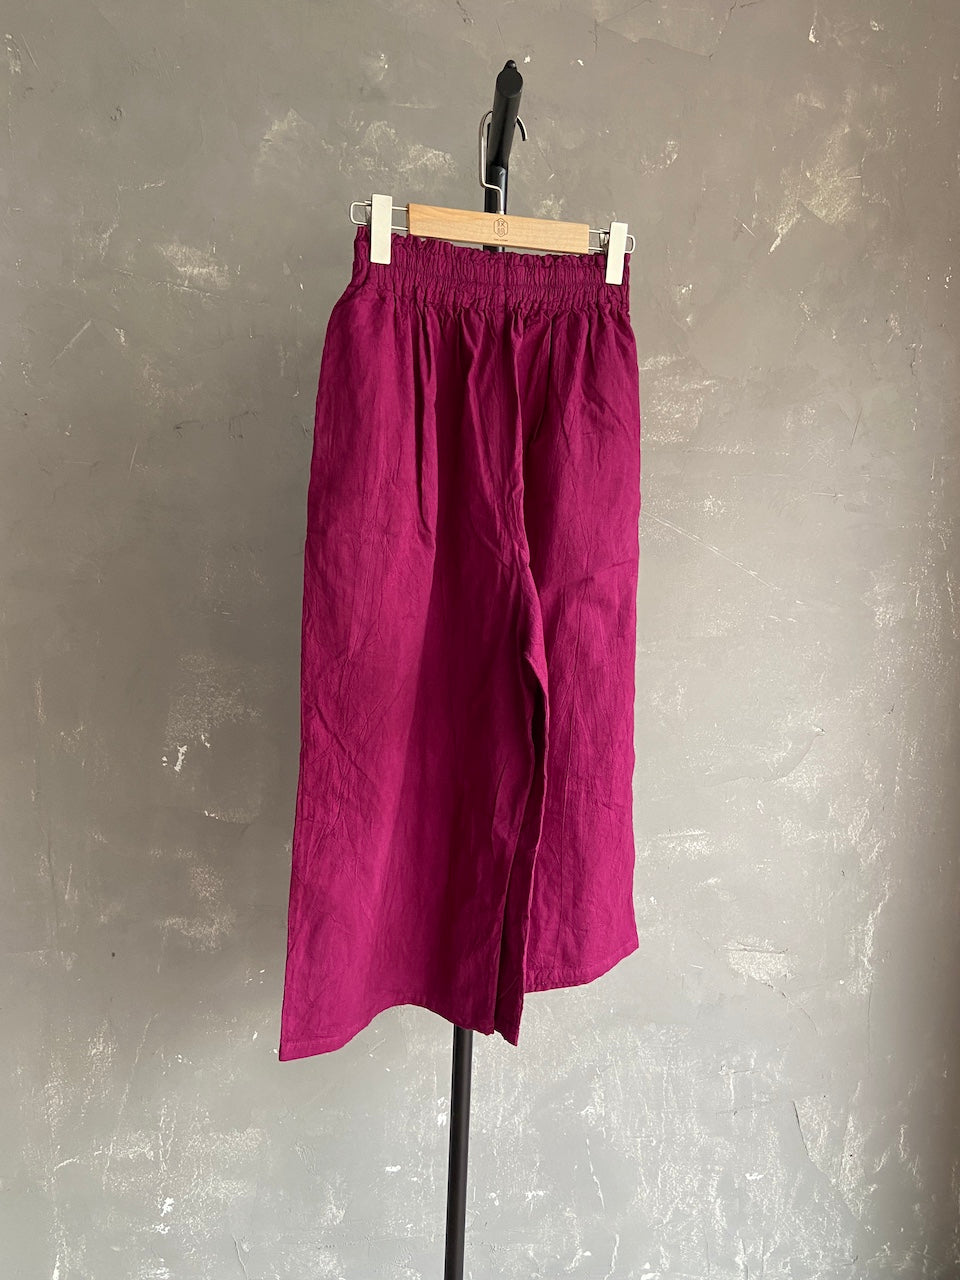 Hand Dyed Farmer's Pants in Wine